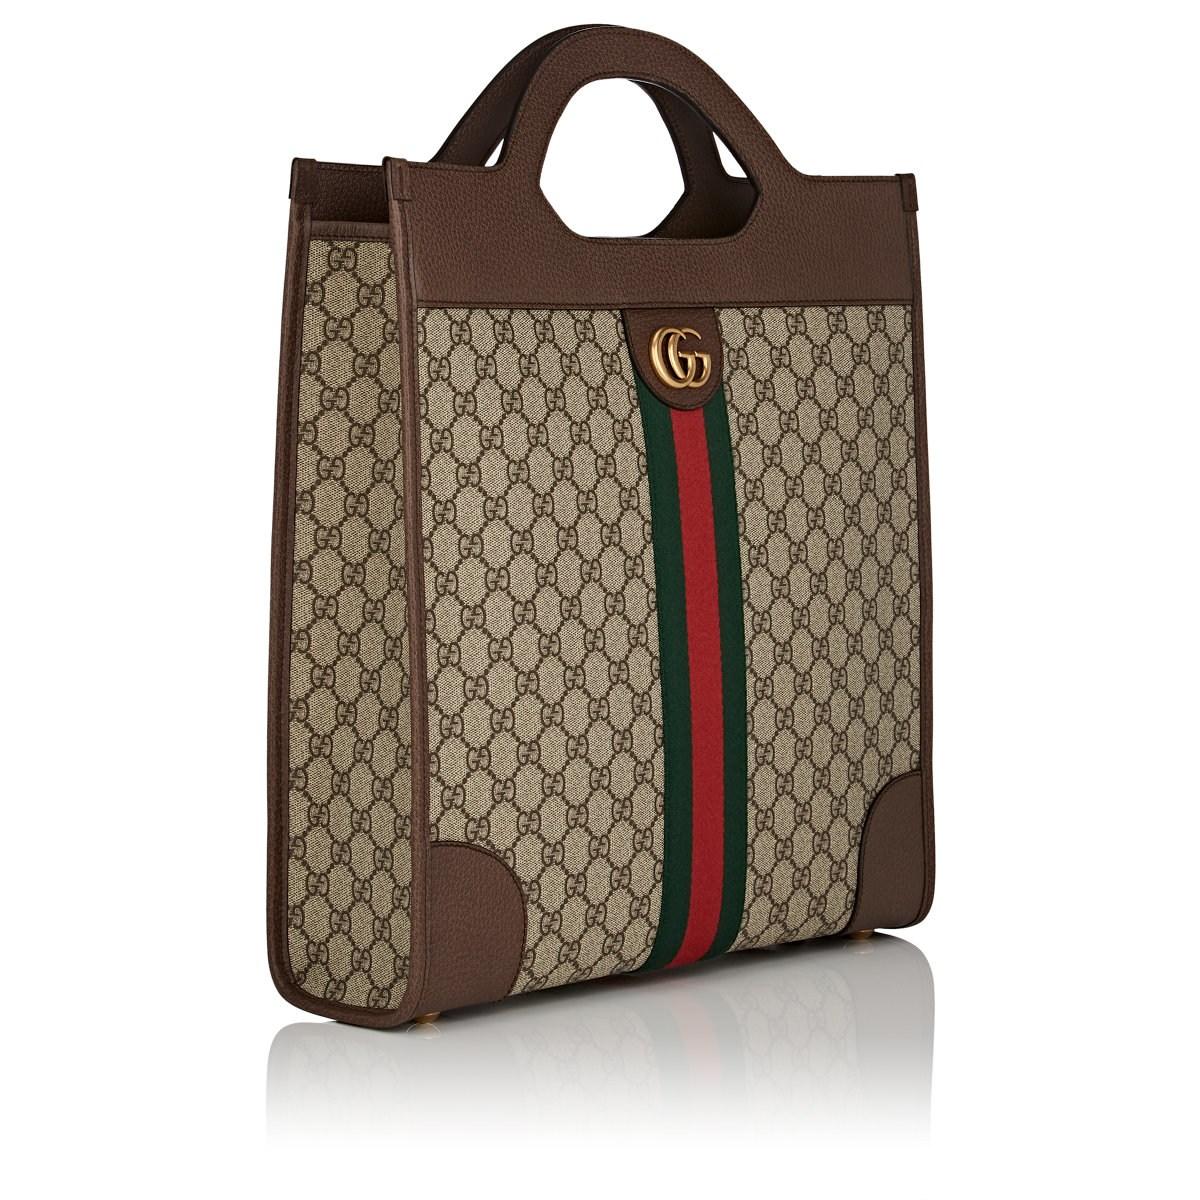 Gucci Canvas GG Supreme Tote Bag in Brown for Men - Lyst